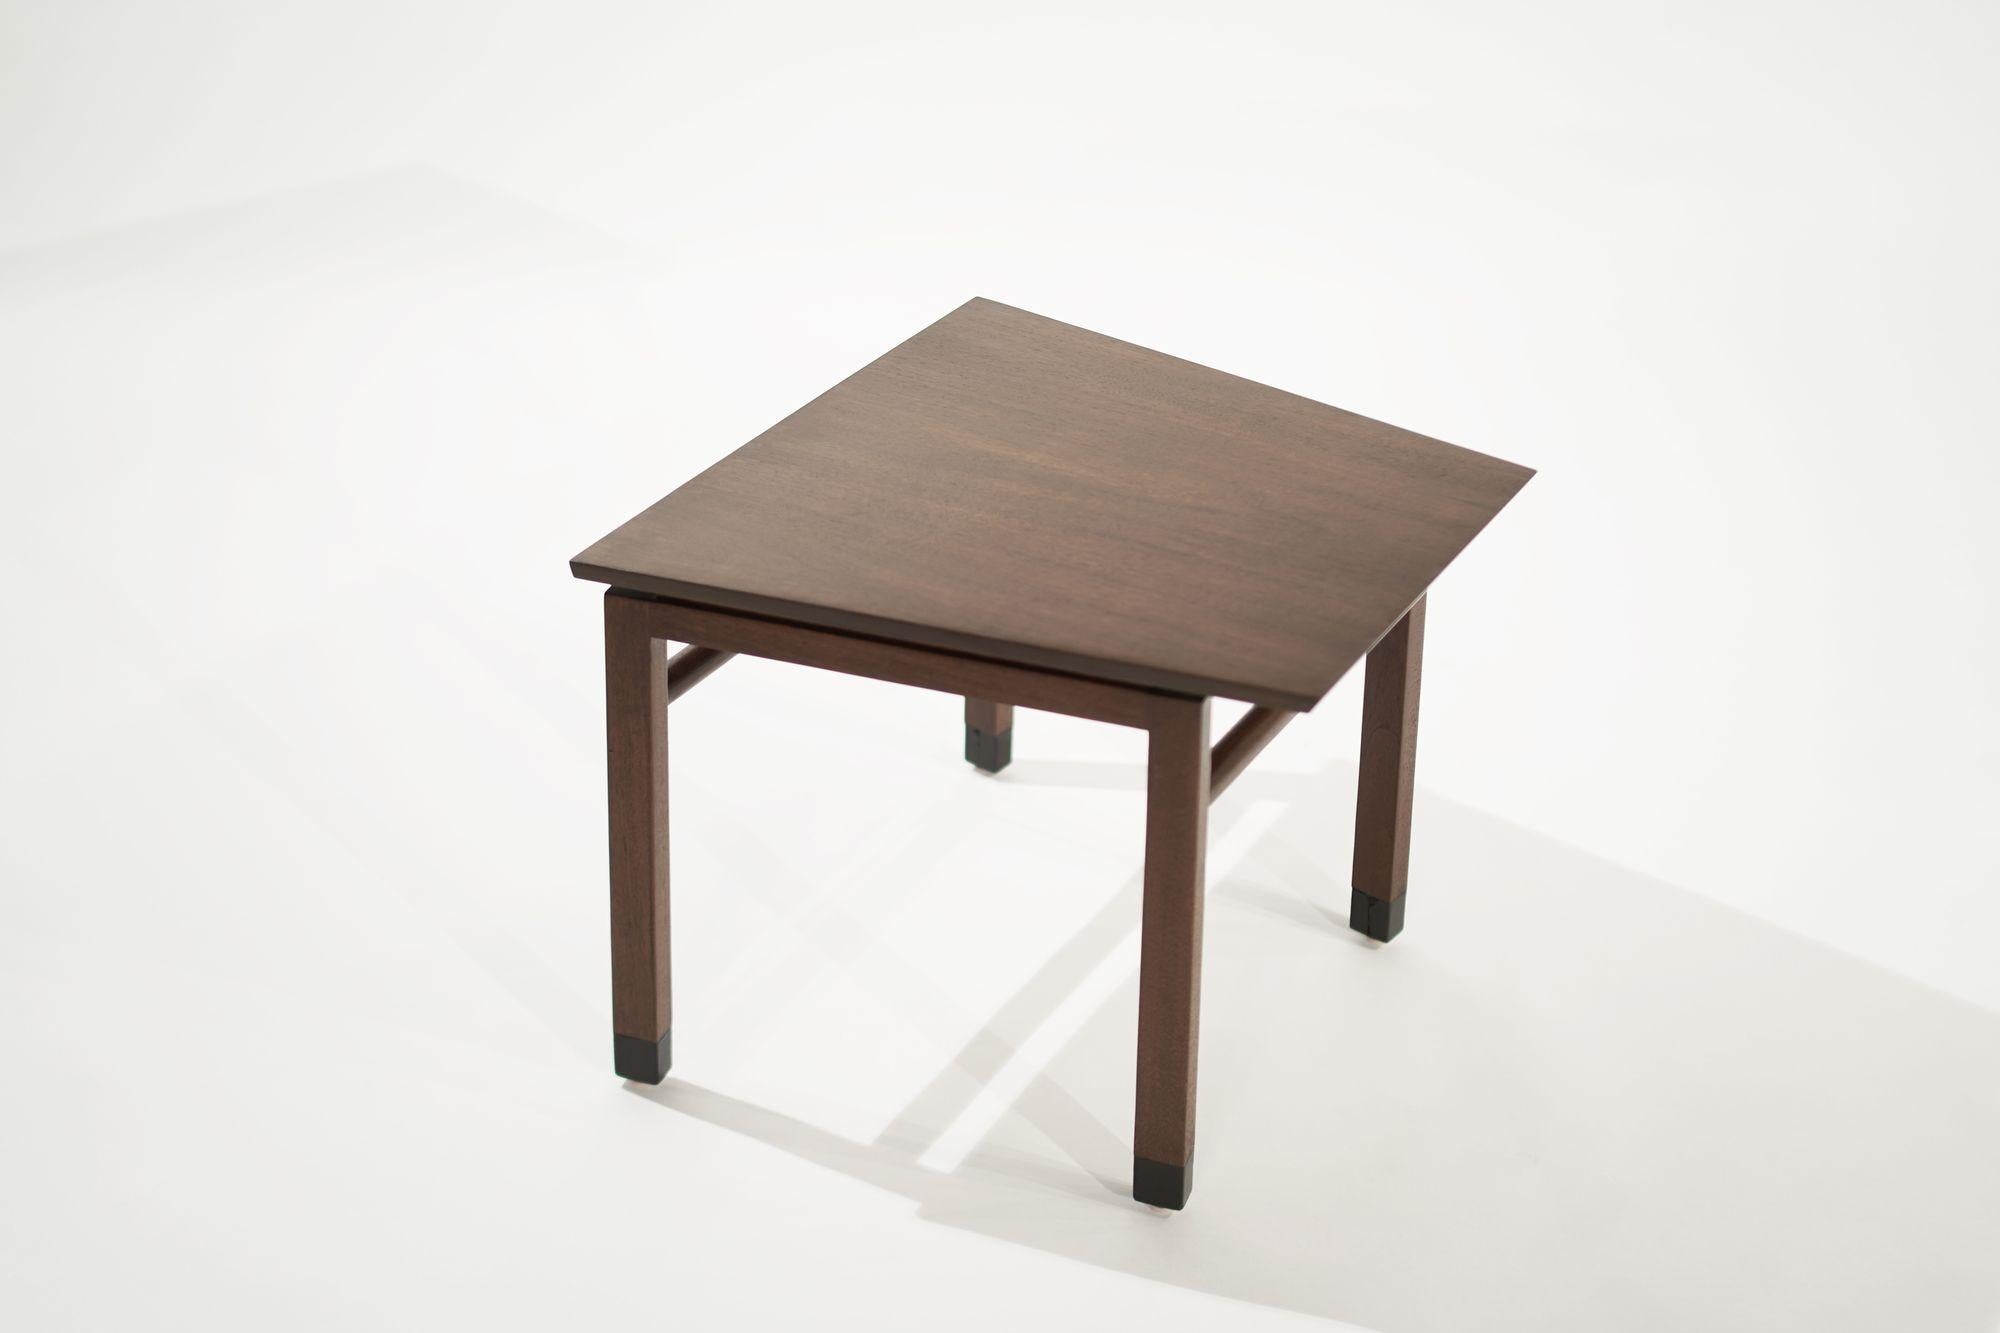 Mid-Century Modern Occasional Wedge Table by Edward Wormley for Dunbar, C. 1950s For Sale